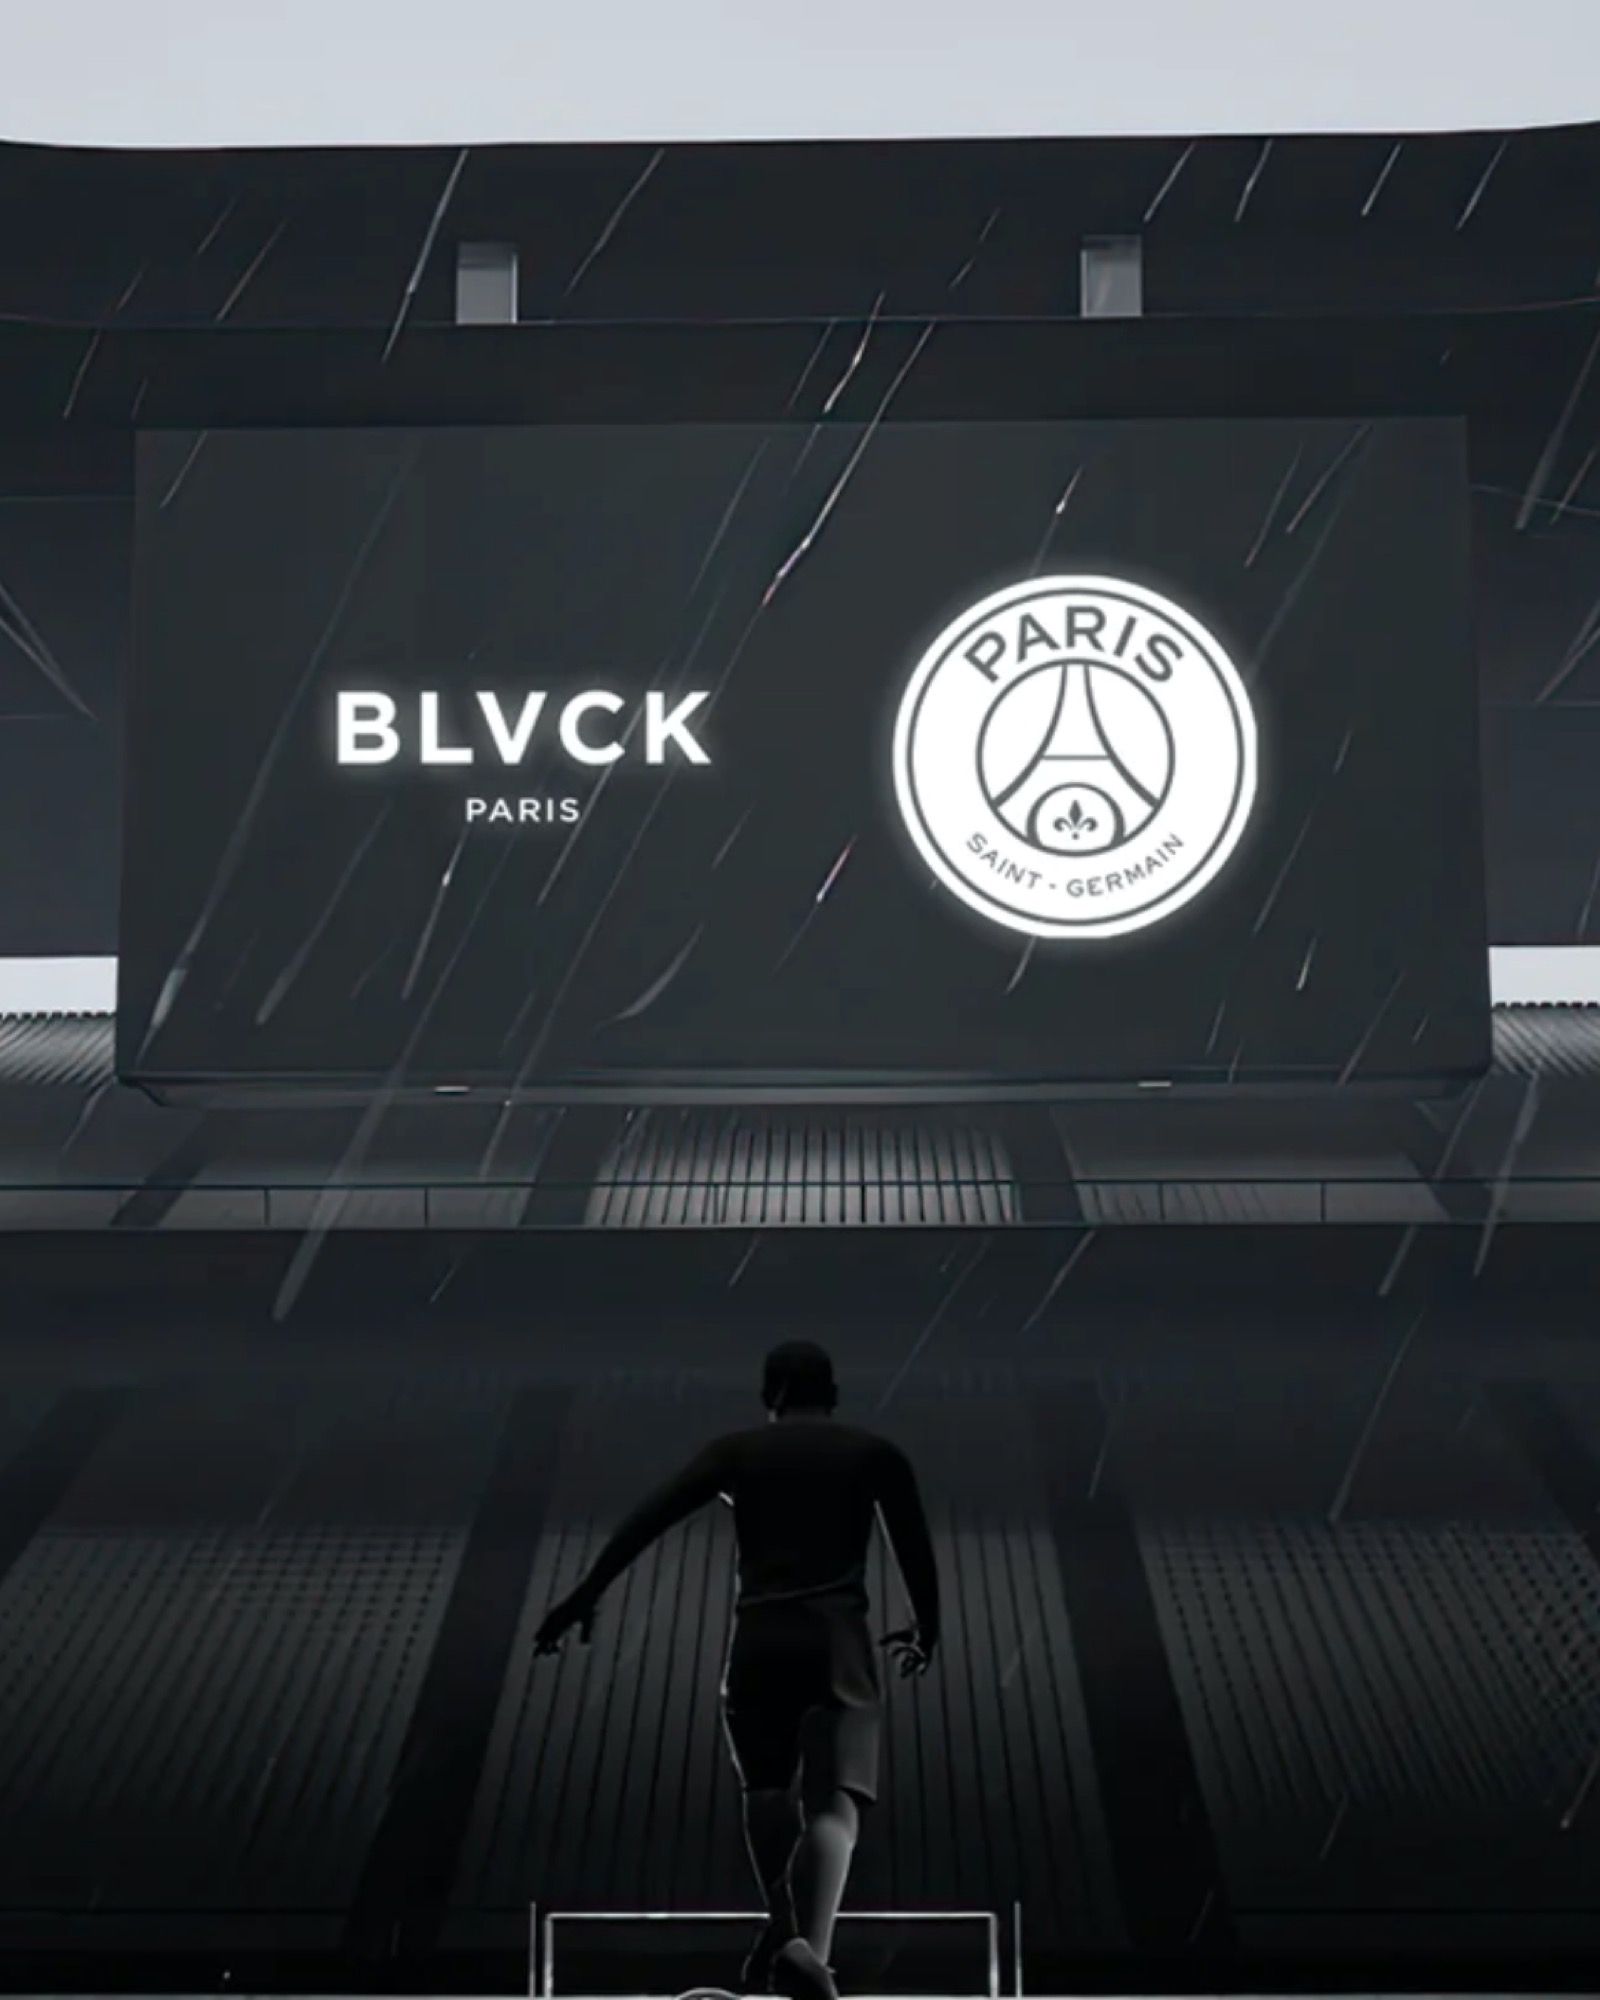 The all-black collection by Blvck Paris and PSG It combines sports, fashion, and digital art